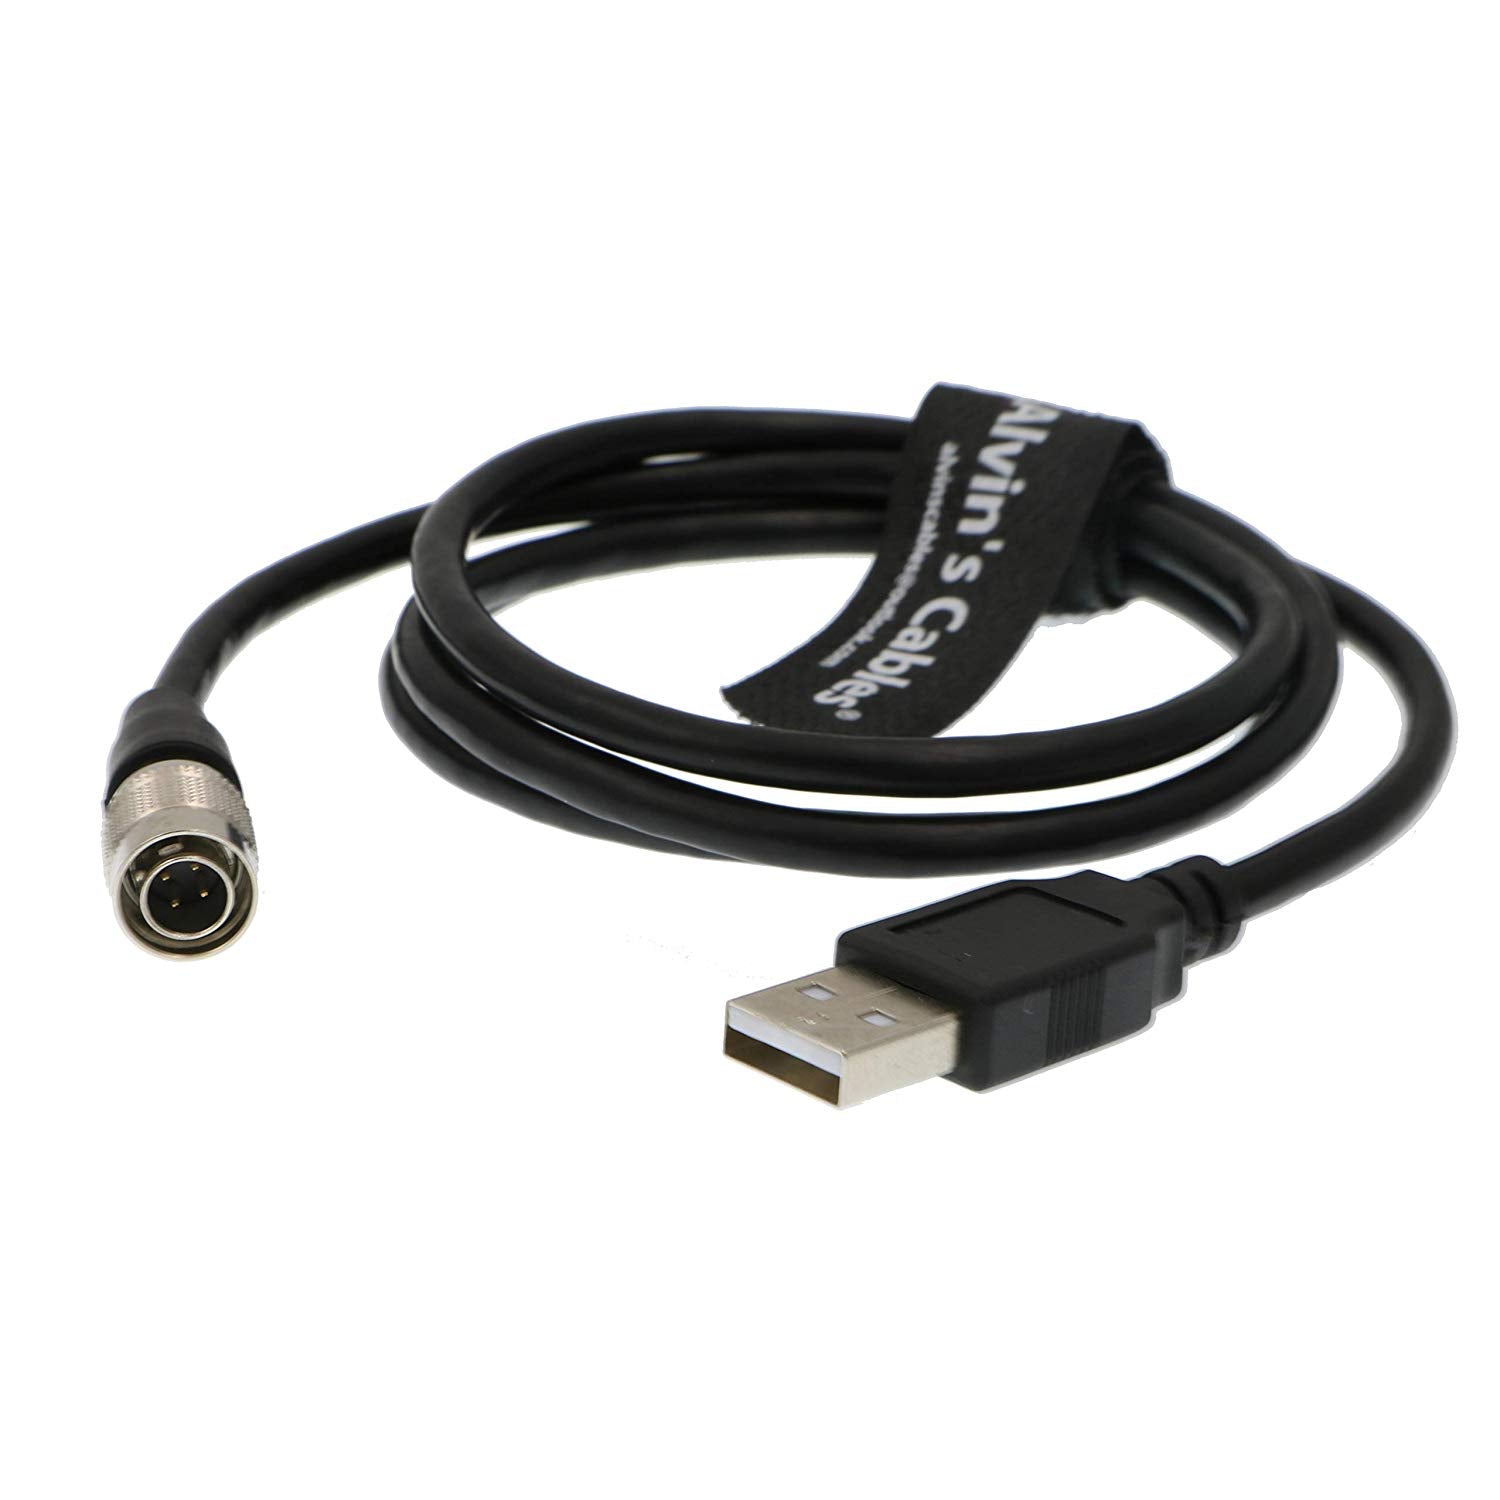 Alvin's Cables 4 Pin Hirose Male to USB Data Cable for Camera Computer Video